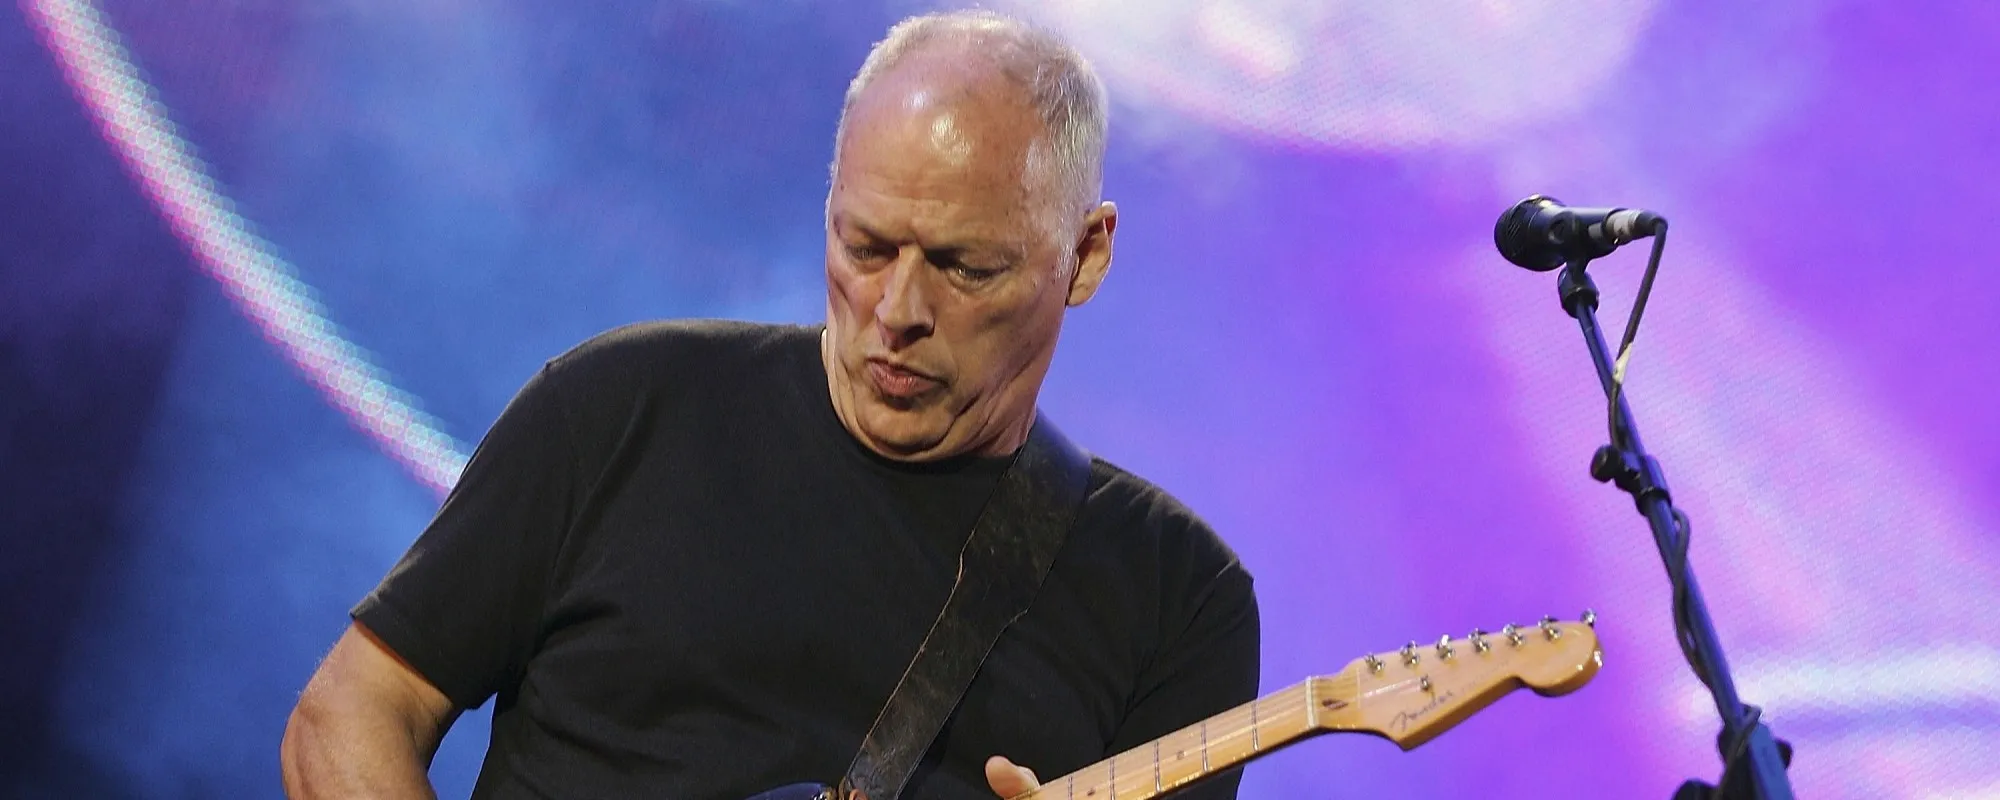 5 Notable David Gilmour Guest Performances in Honor of the Pink Floyd Guitarist